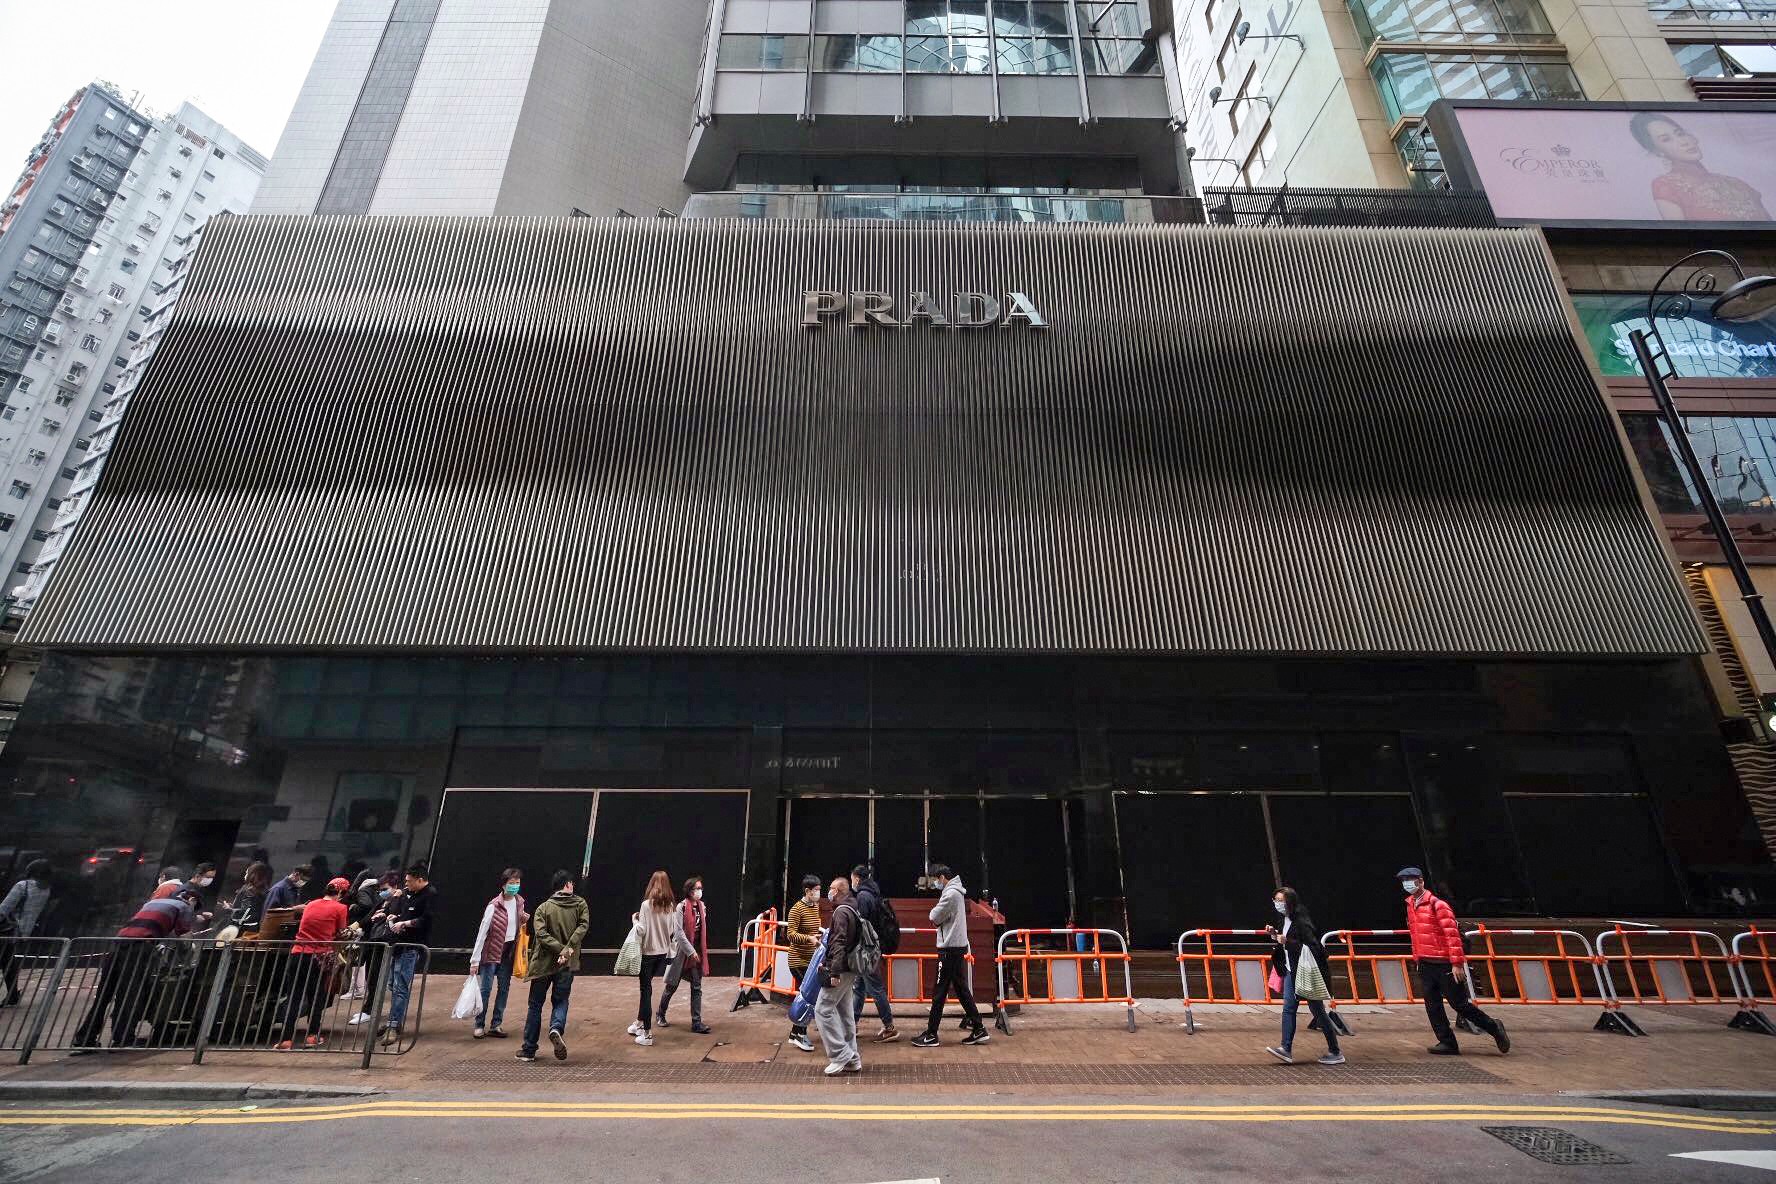 A Prada store on Russell Street in Causeway Bay, Hong Kong. The Italian fashion label’s sales took a hit from months of anti-government protests in the city last year. Photo: Sun Yeung